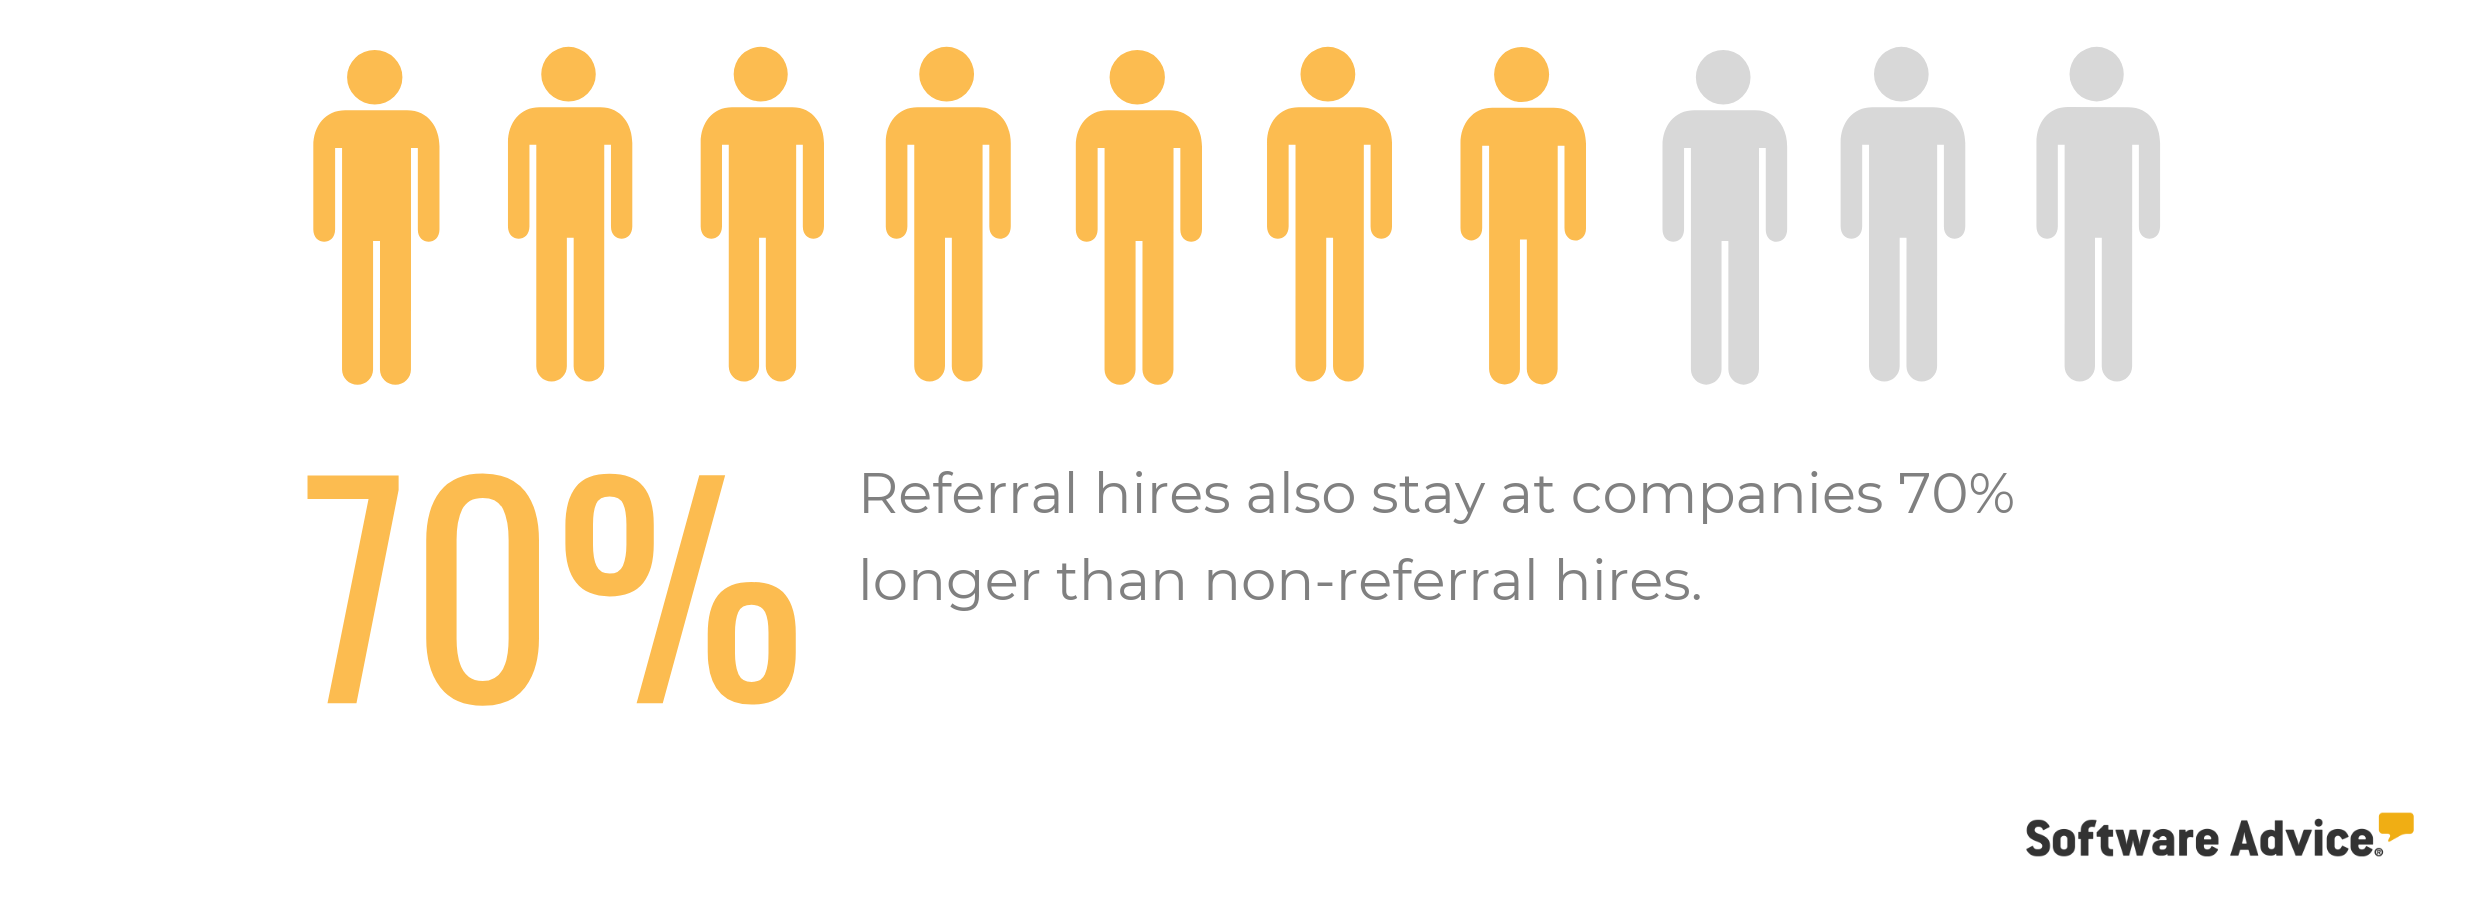 referral-hires-stay-at-companies-longer